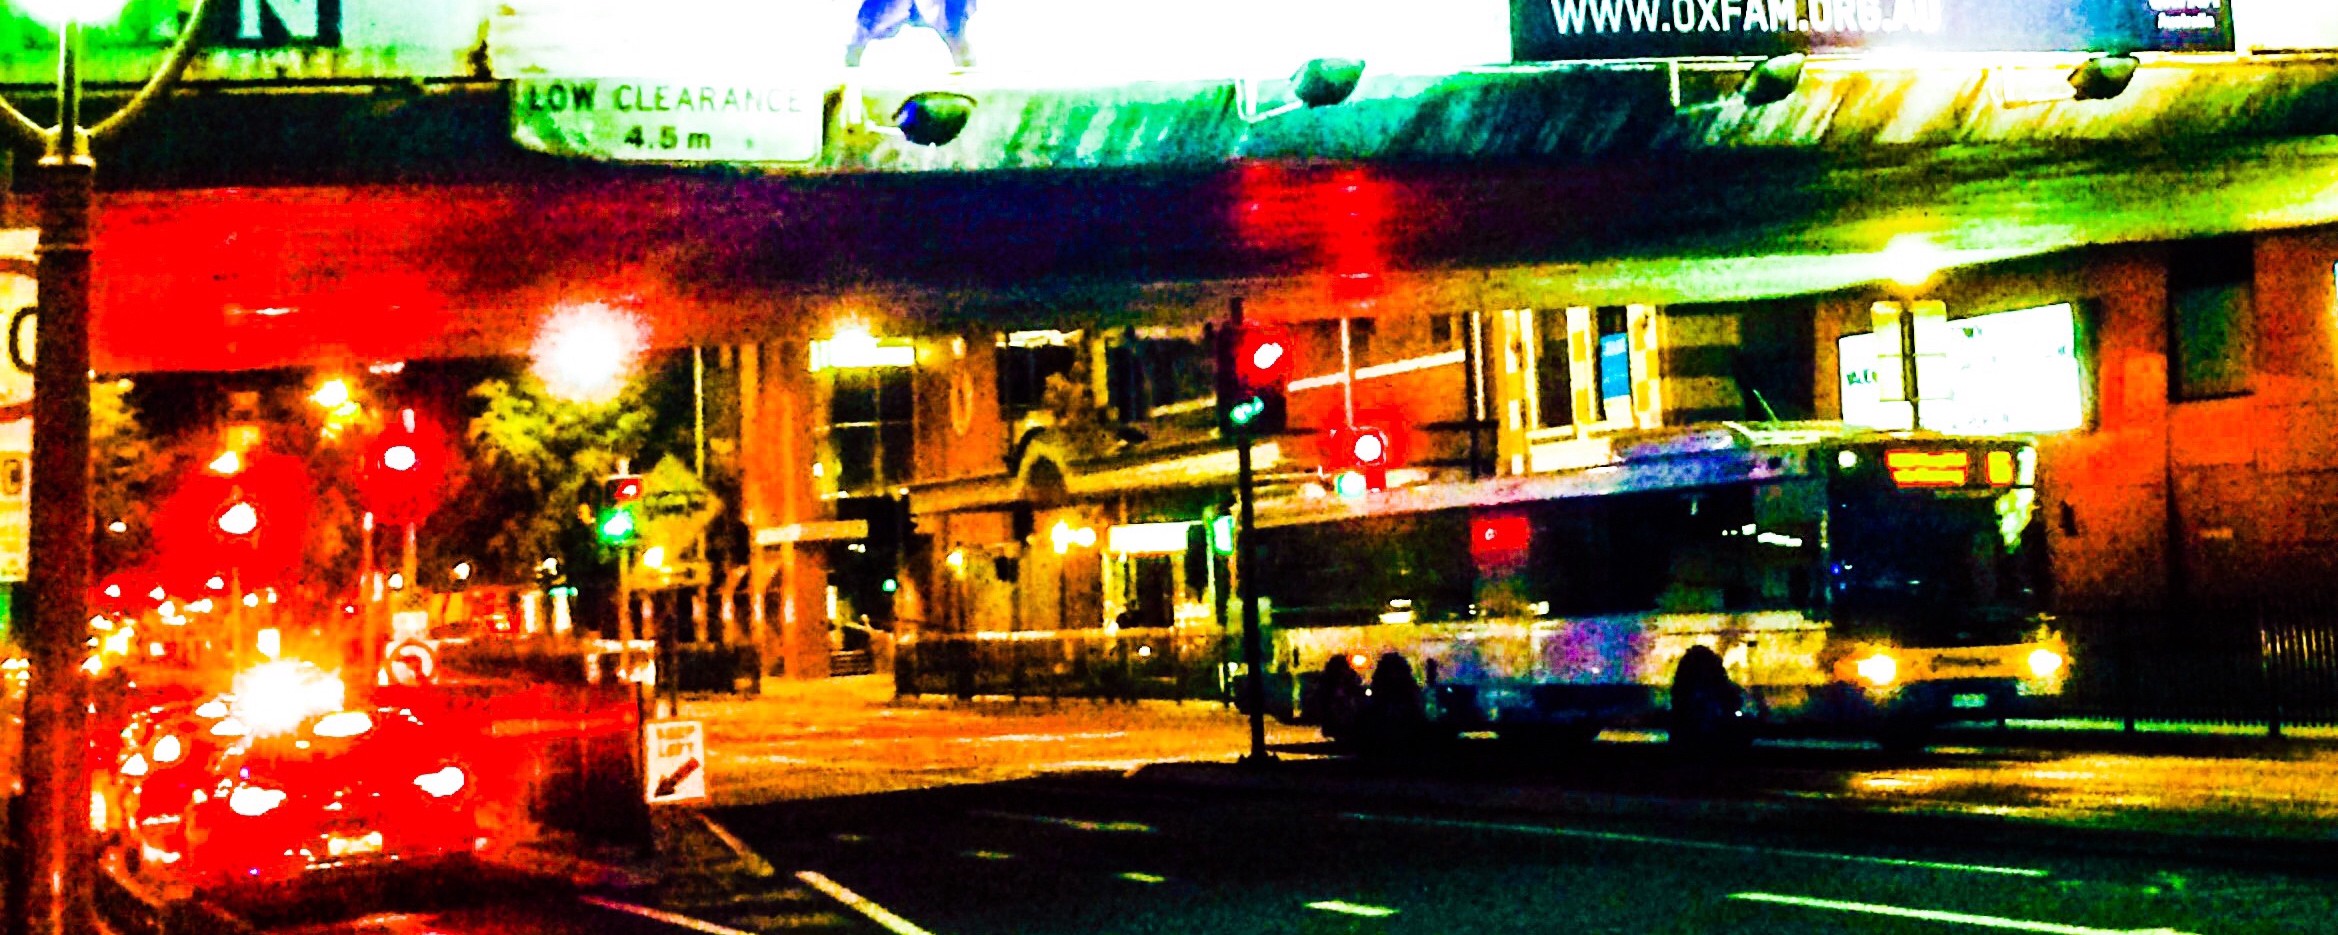 A street at night, with a bus waiting at an intersection.